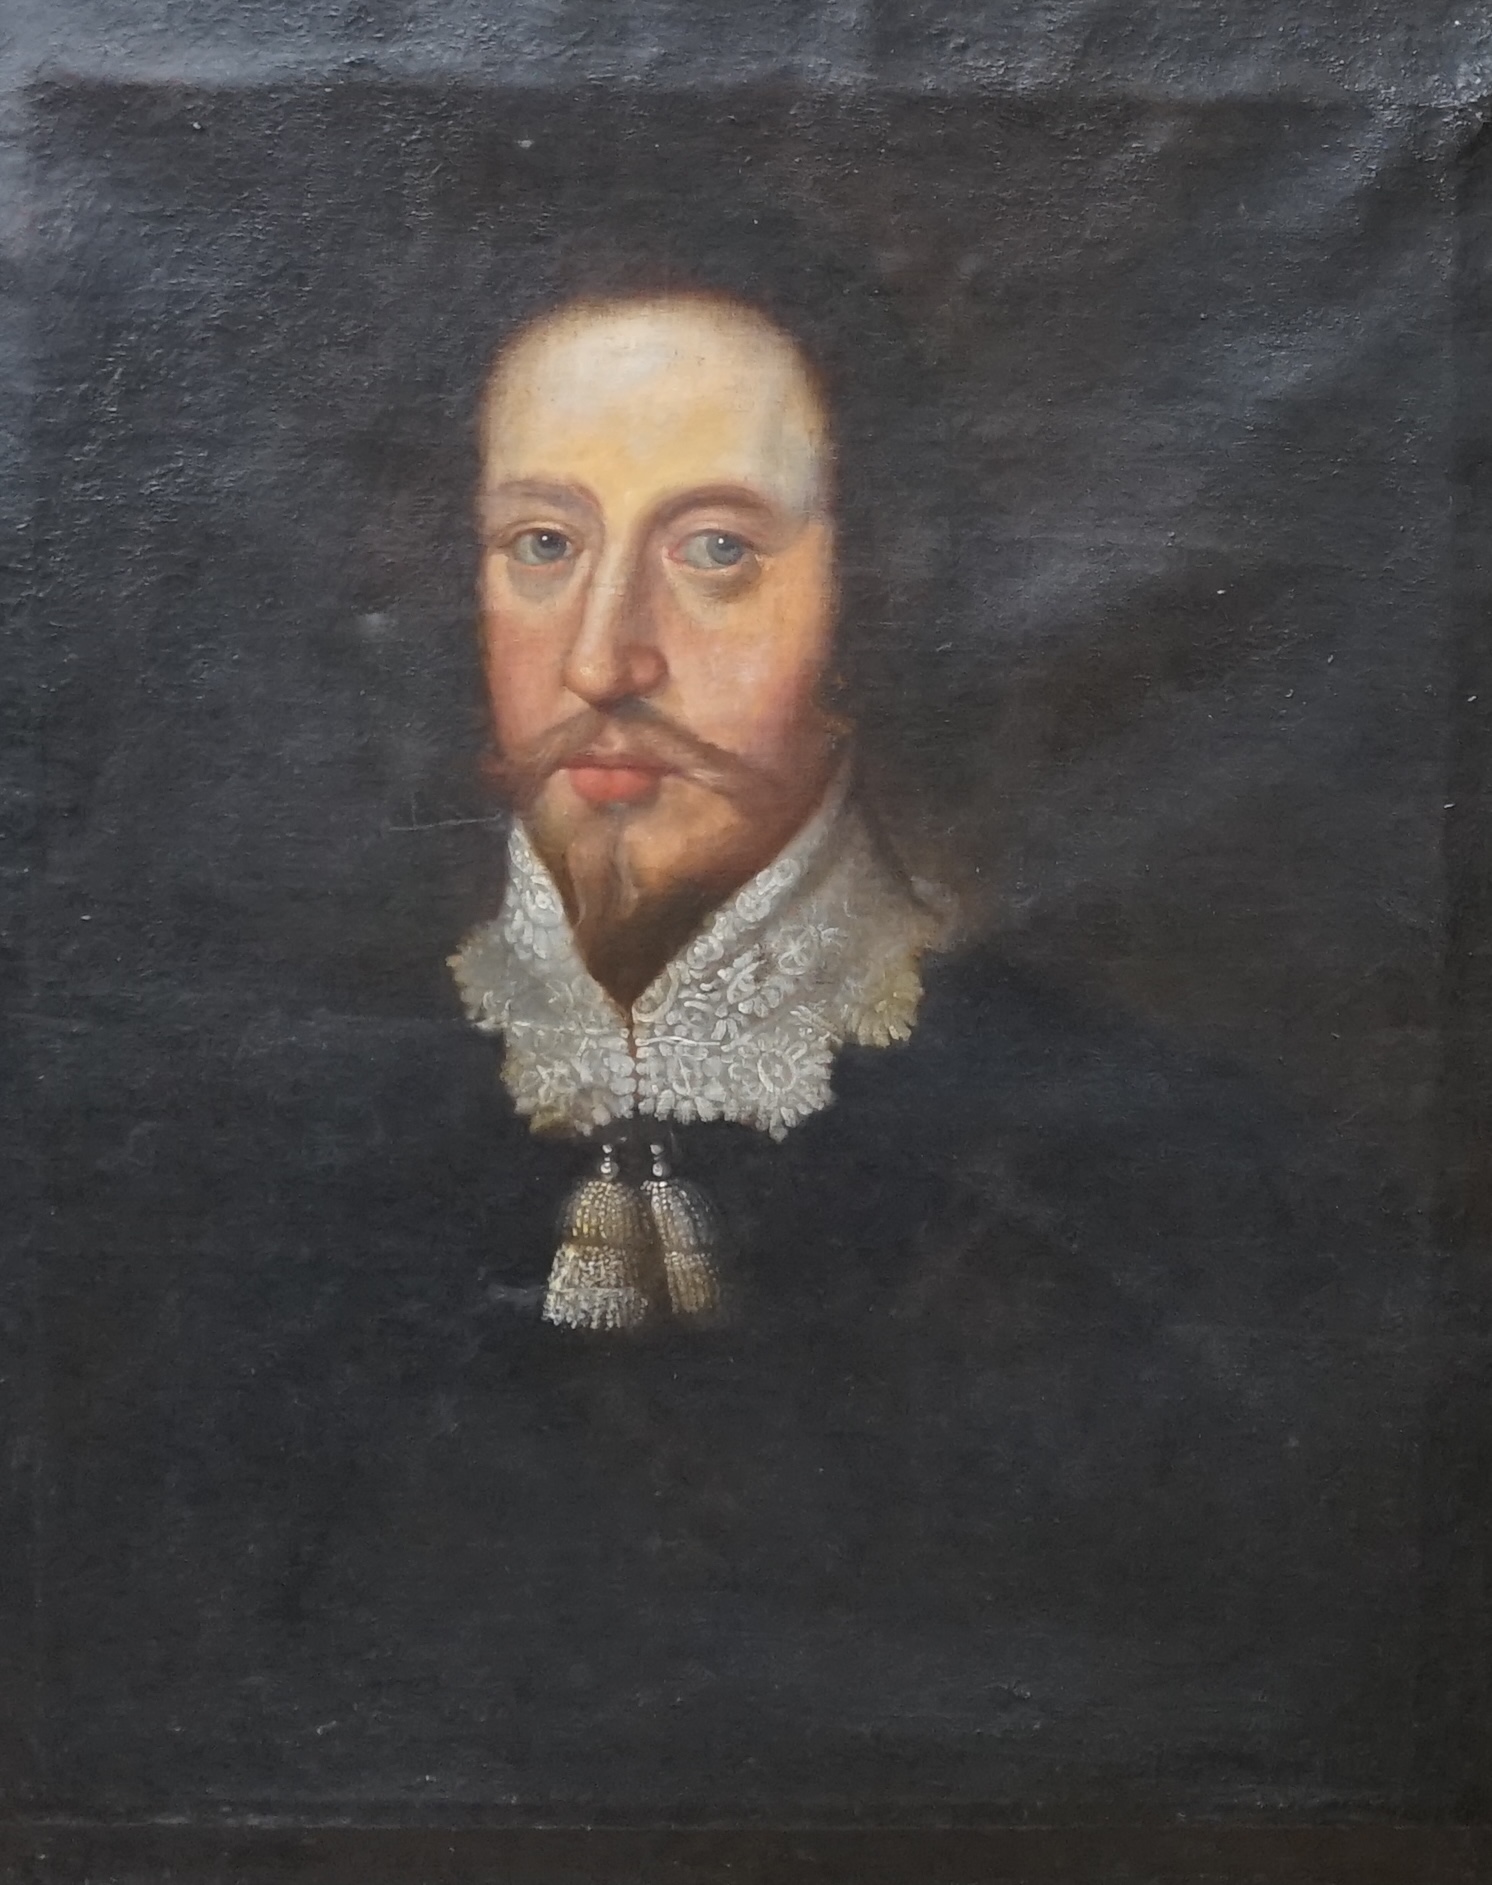 Mid 17th century, Dutch School, oil on canvas, Portrait of a gentleman with lace collar, 73 x 60cm. Condition - poor, several repairs to the canvas, areas of re-touching